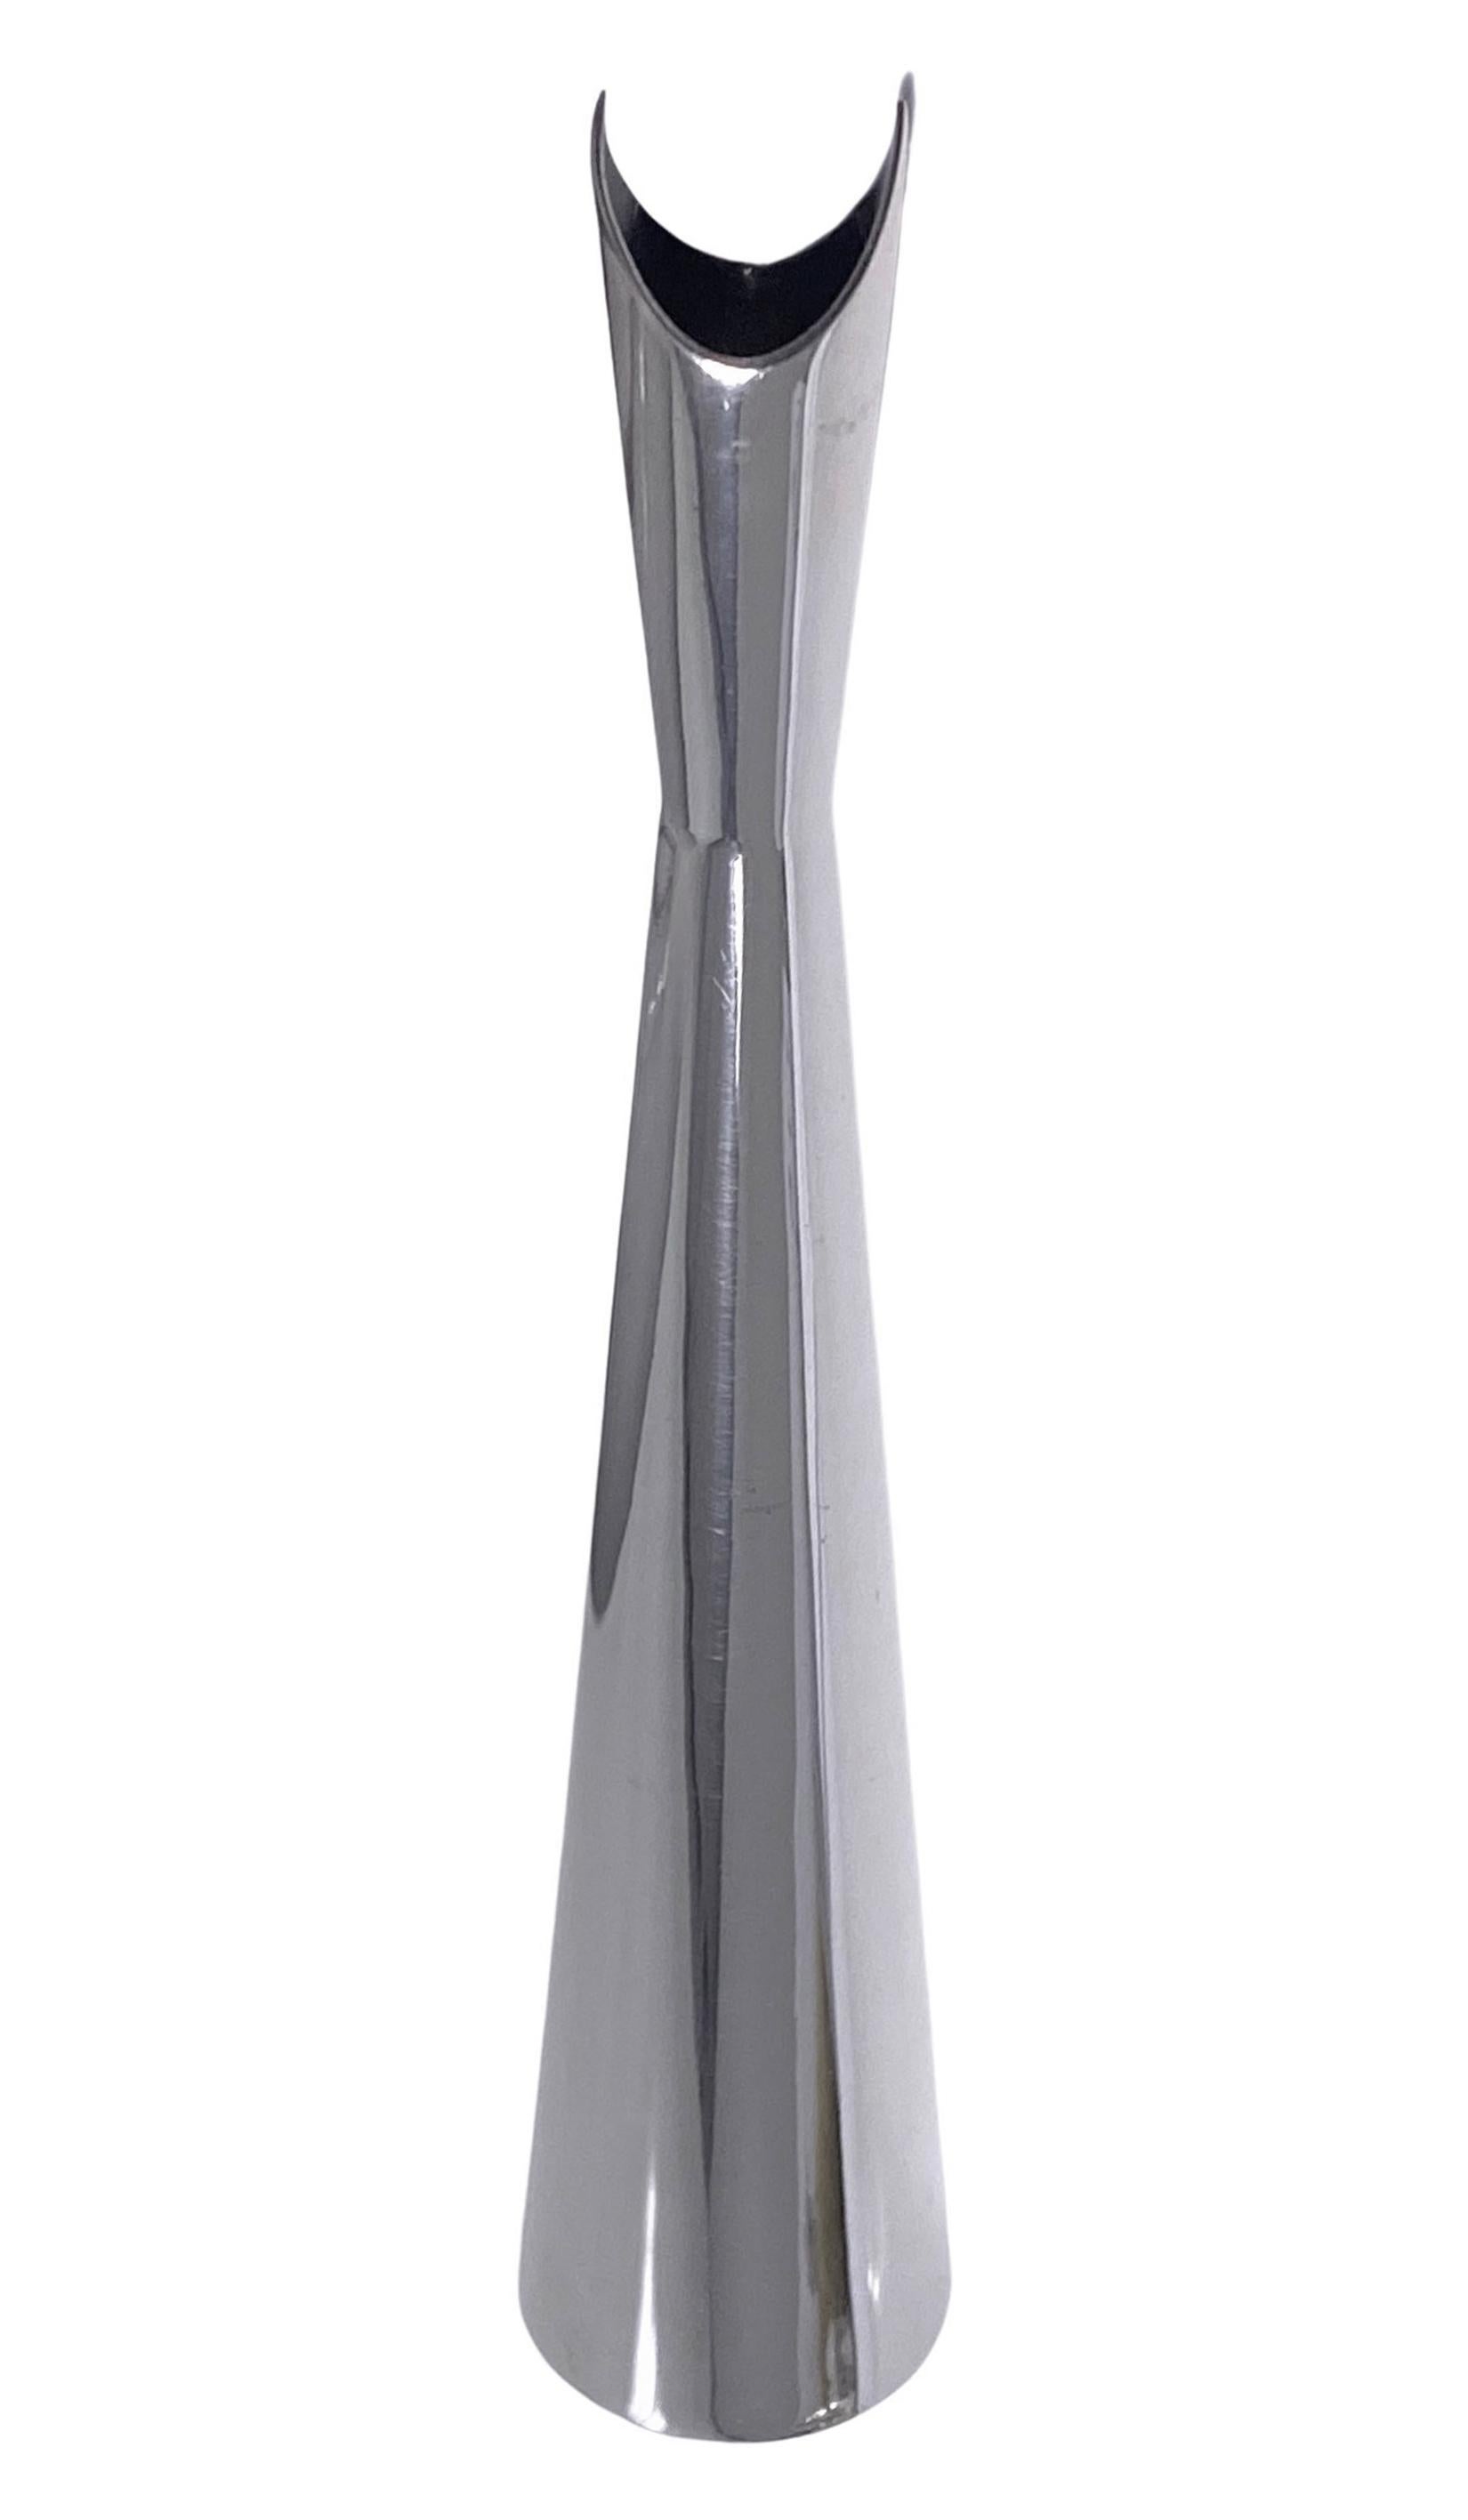 Silvered Metal Vase Lino Sabattini  C.1957. Signed to base with Christofle Coll Gallia mark.Height:8.125 inches. Lino Sabattini became director of design at the prestigious Christofle Orfèvrerie, where he created metal ware notable for abstract